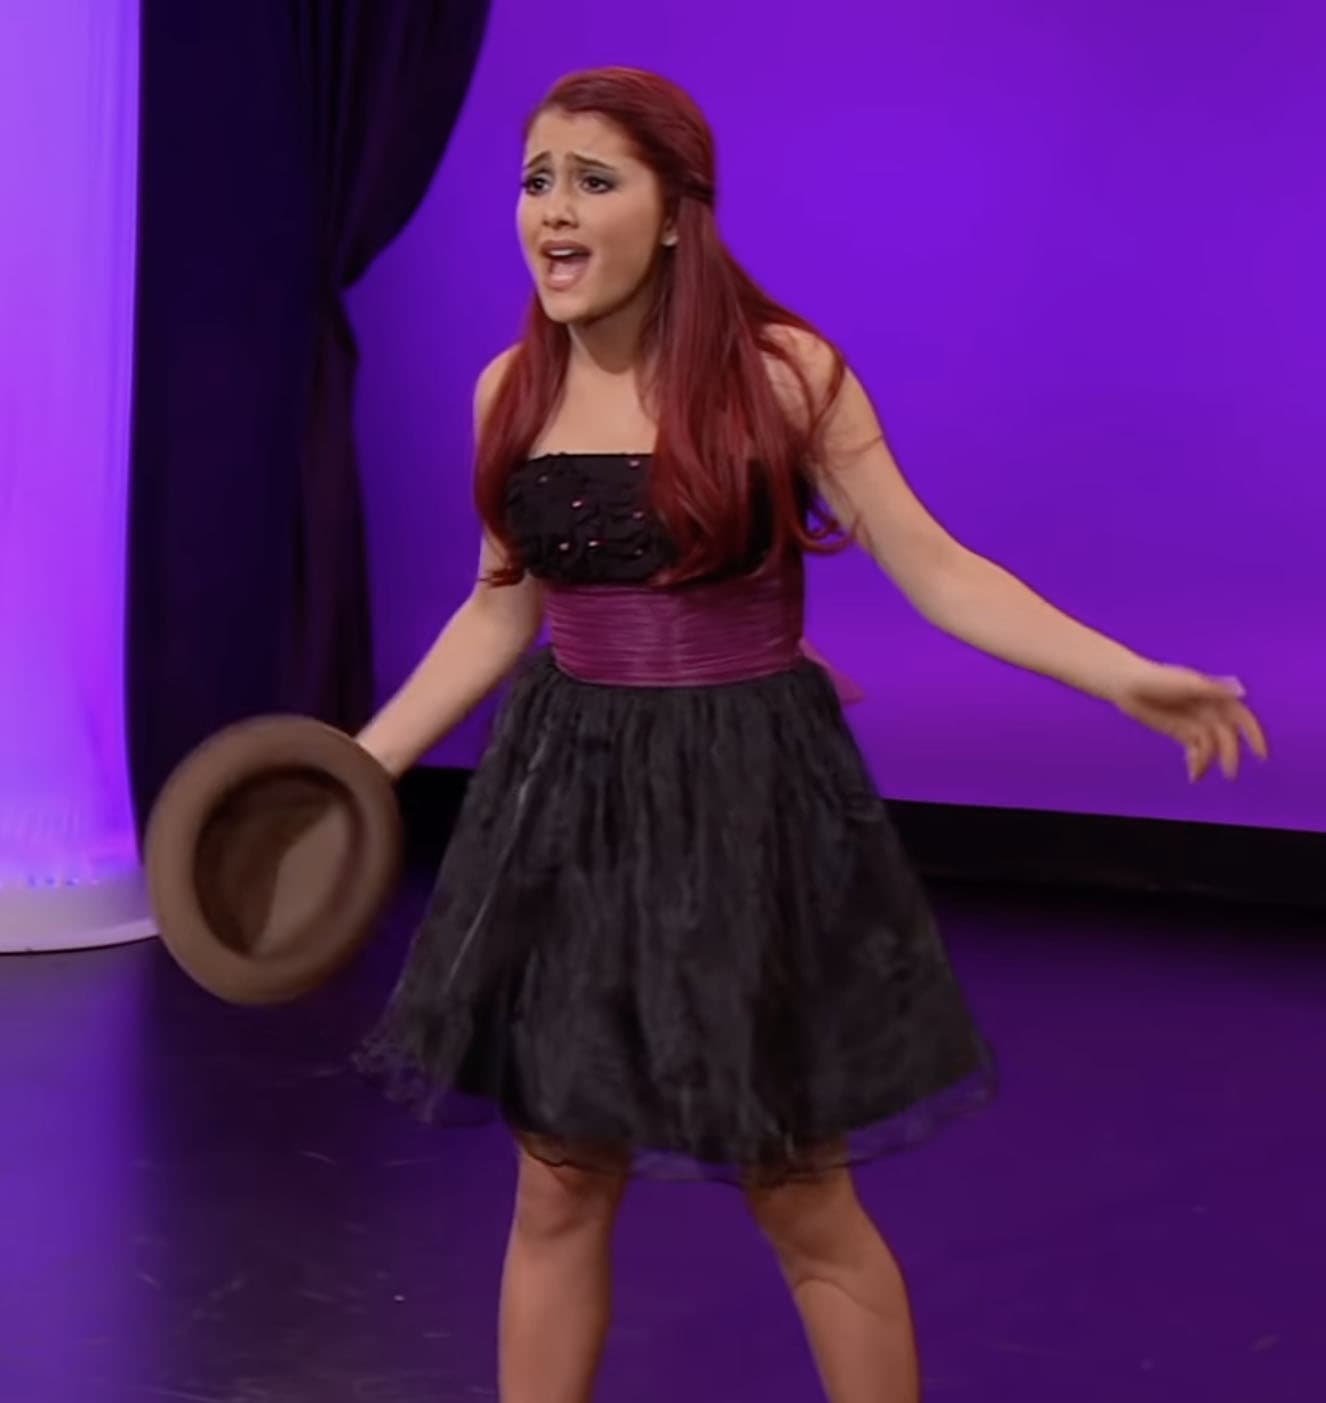 Ariana Grande kick-started her career in Nickelodeon's Victorious and Sam and Cat